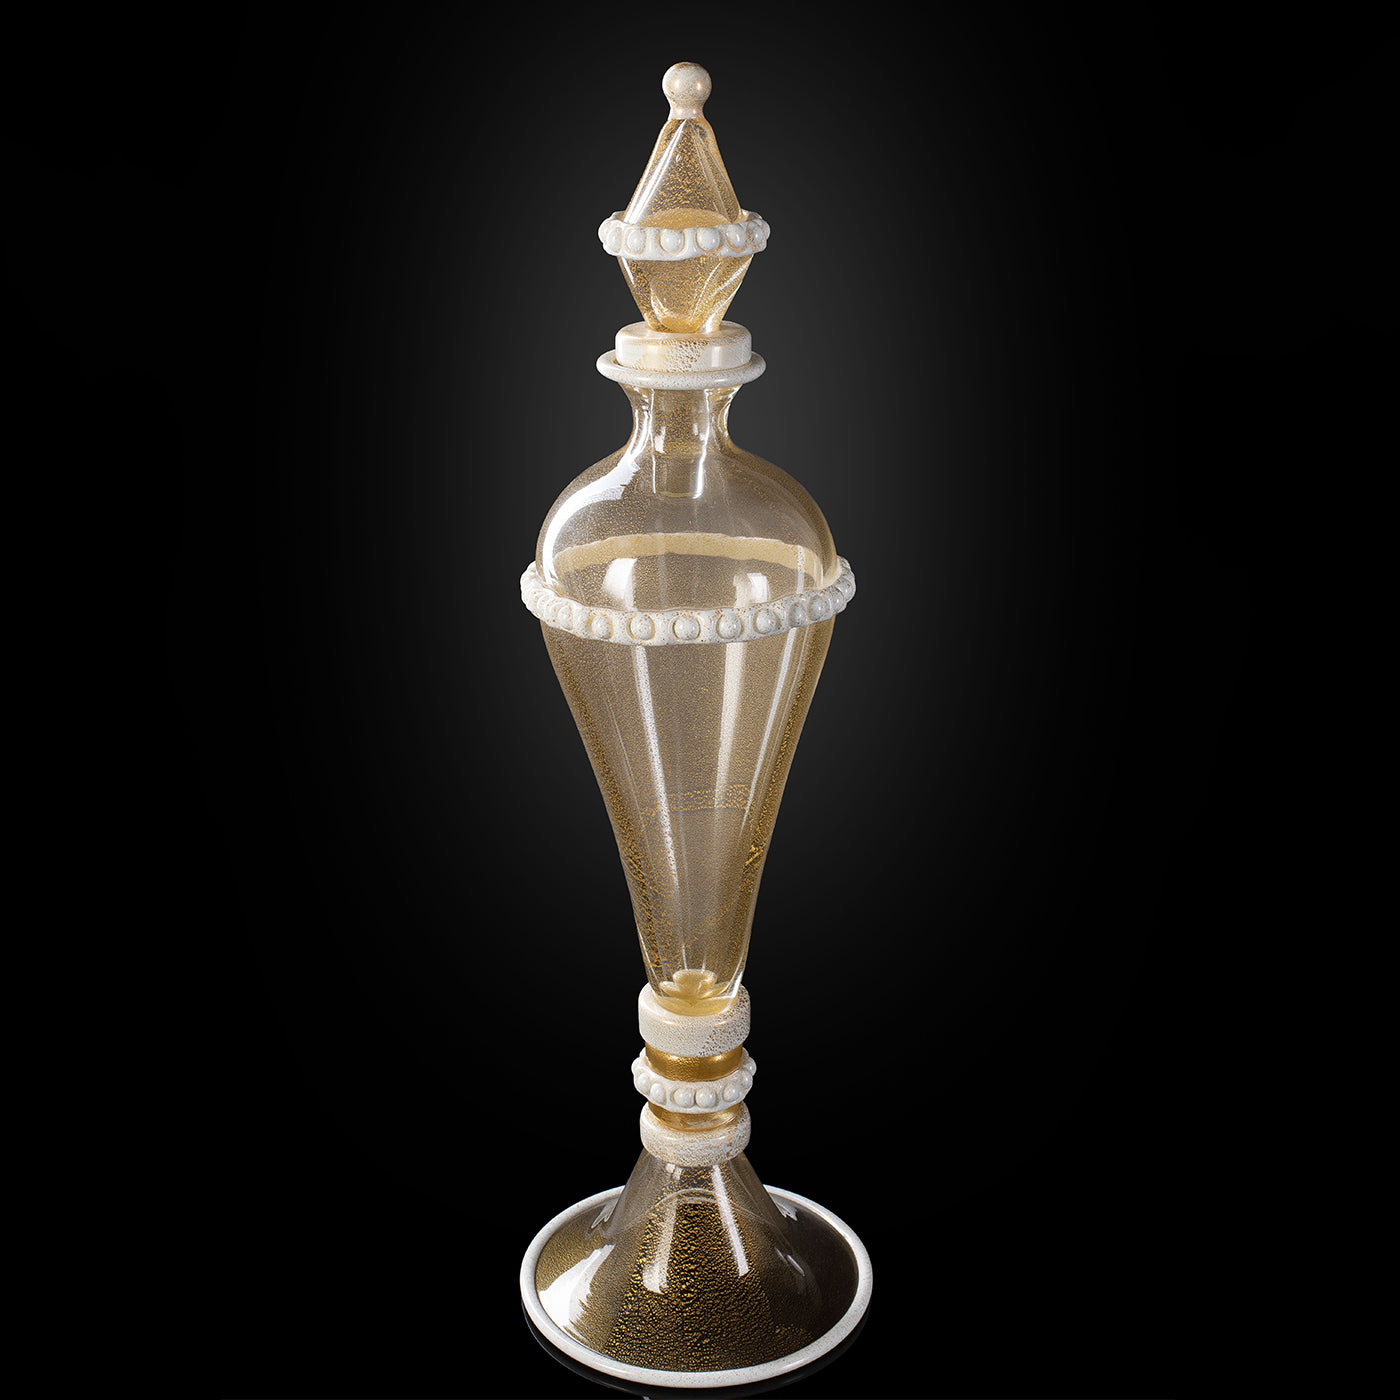 Stmat 24K White & Gold Footed Vase with Lid - Alternative view 3